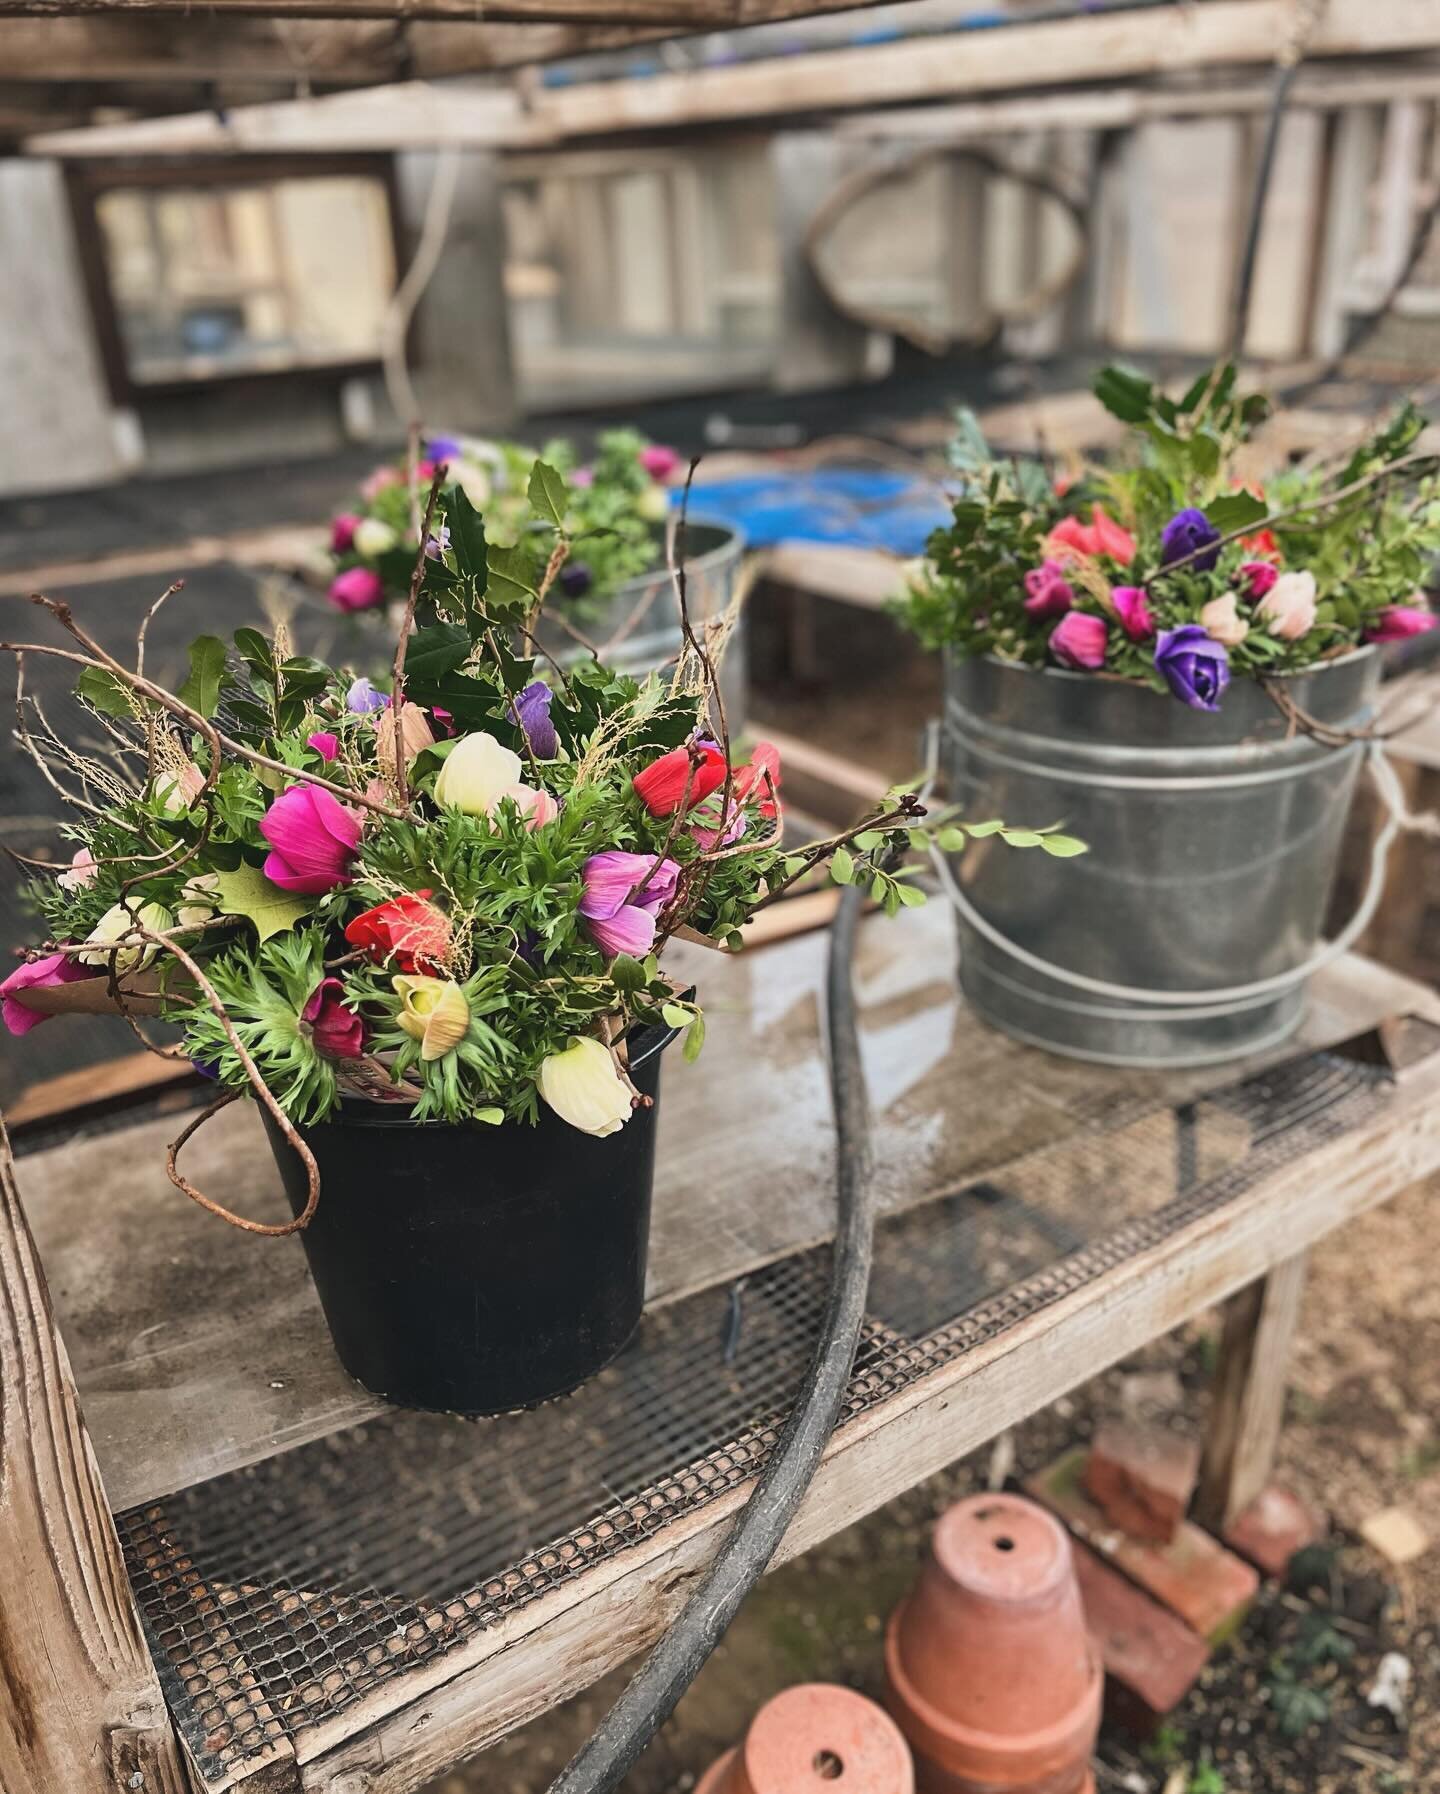 Thoroughly enjoyed working with these gorgeous anemone from @localroseslongisland and foraging holly, bittersweet vine and meadow grasses to create these bouquets for our Pop-Up shop last weekend. Big thanks to ALL who participated!
💜🩷❤️
Also last 